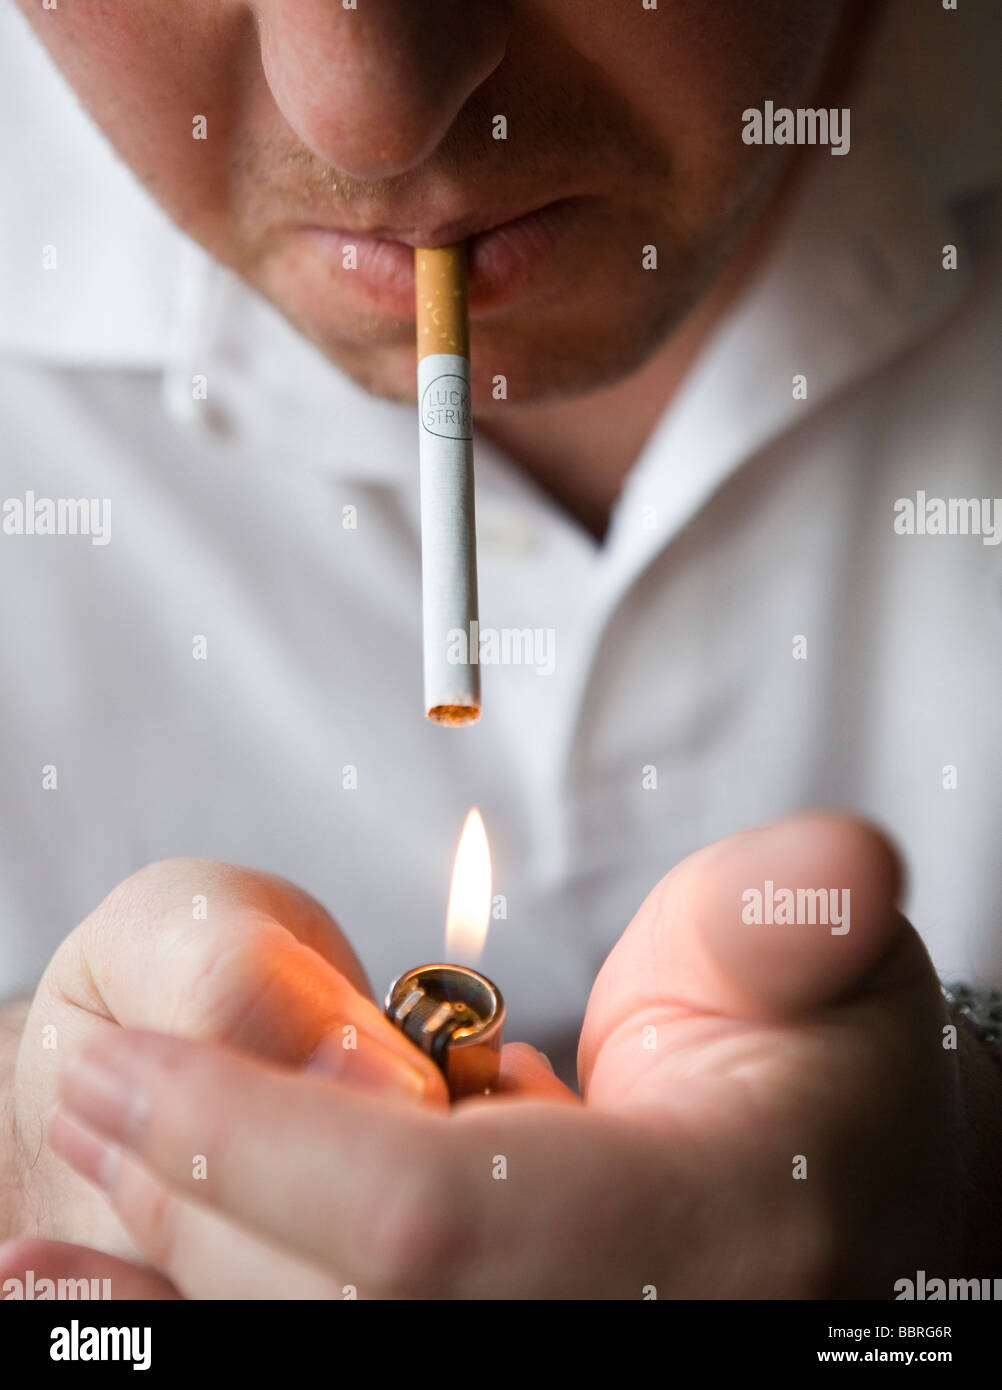 A smoker lights a Lucky Strike cigarette made by British American Tobacco Stock Photo